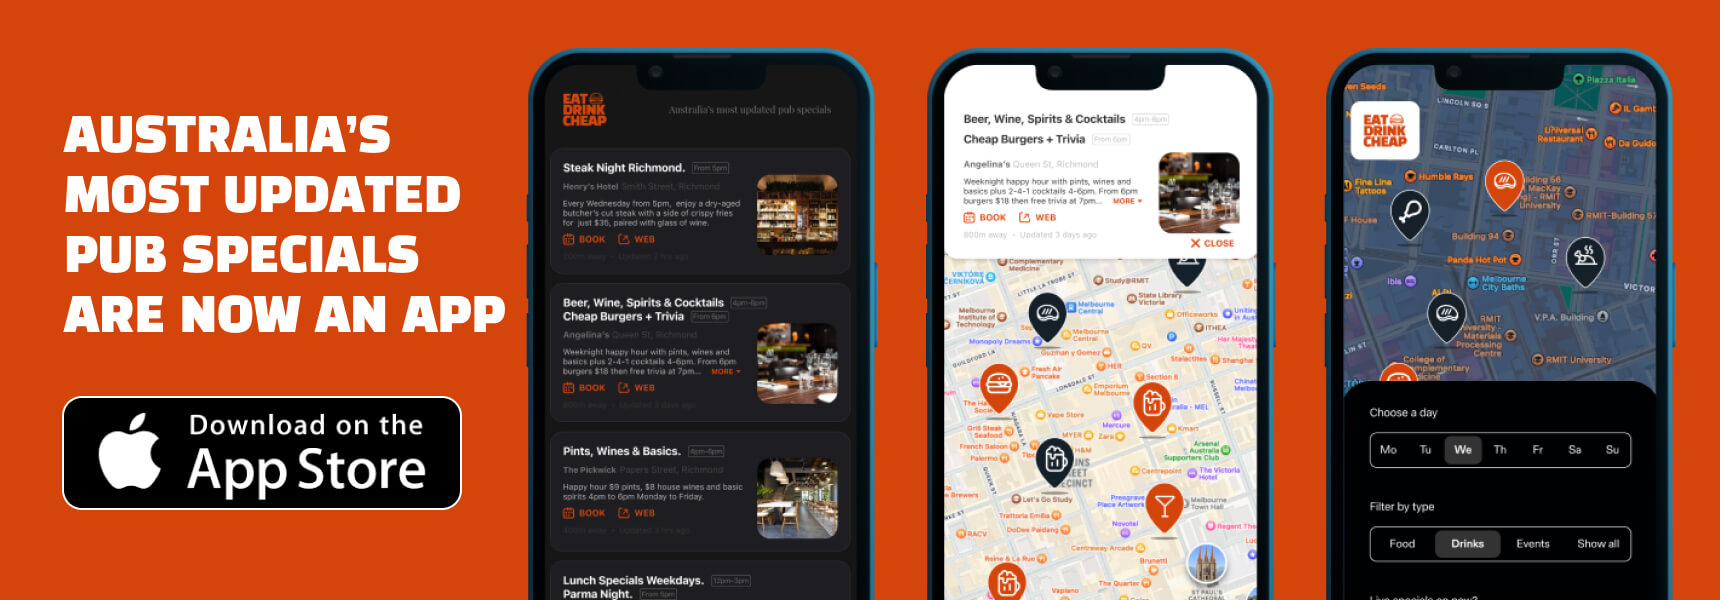 Australia's most updated pub specials is now an iPhone app